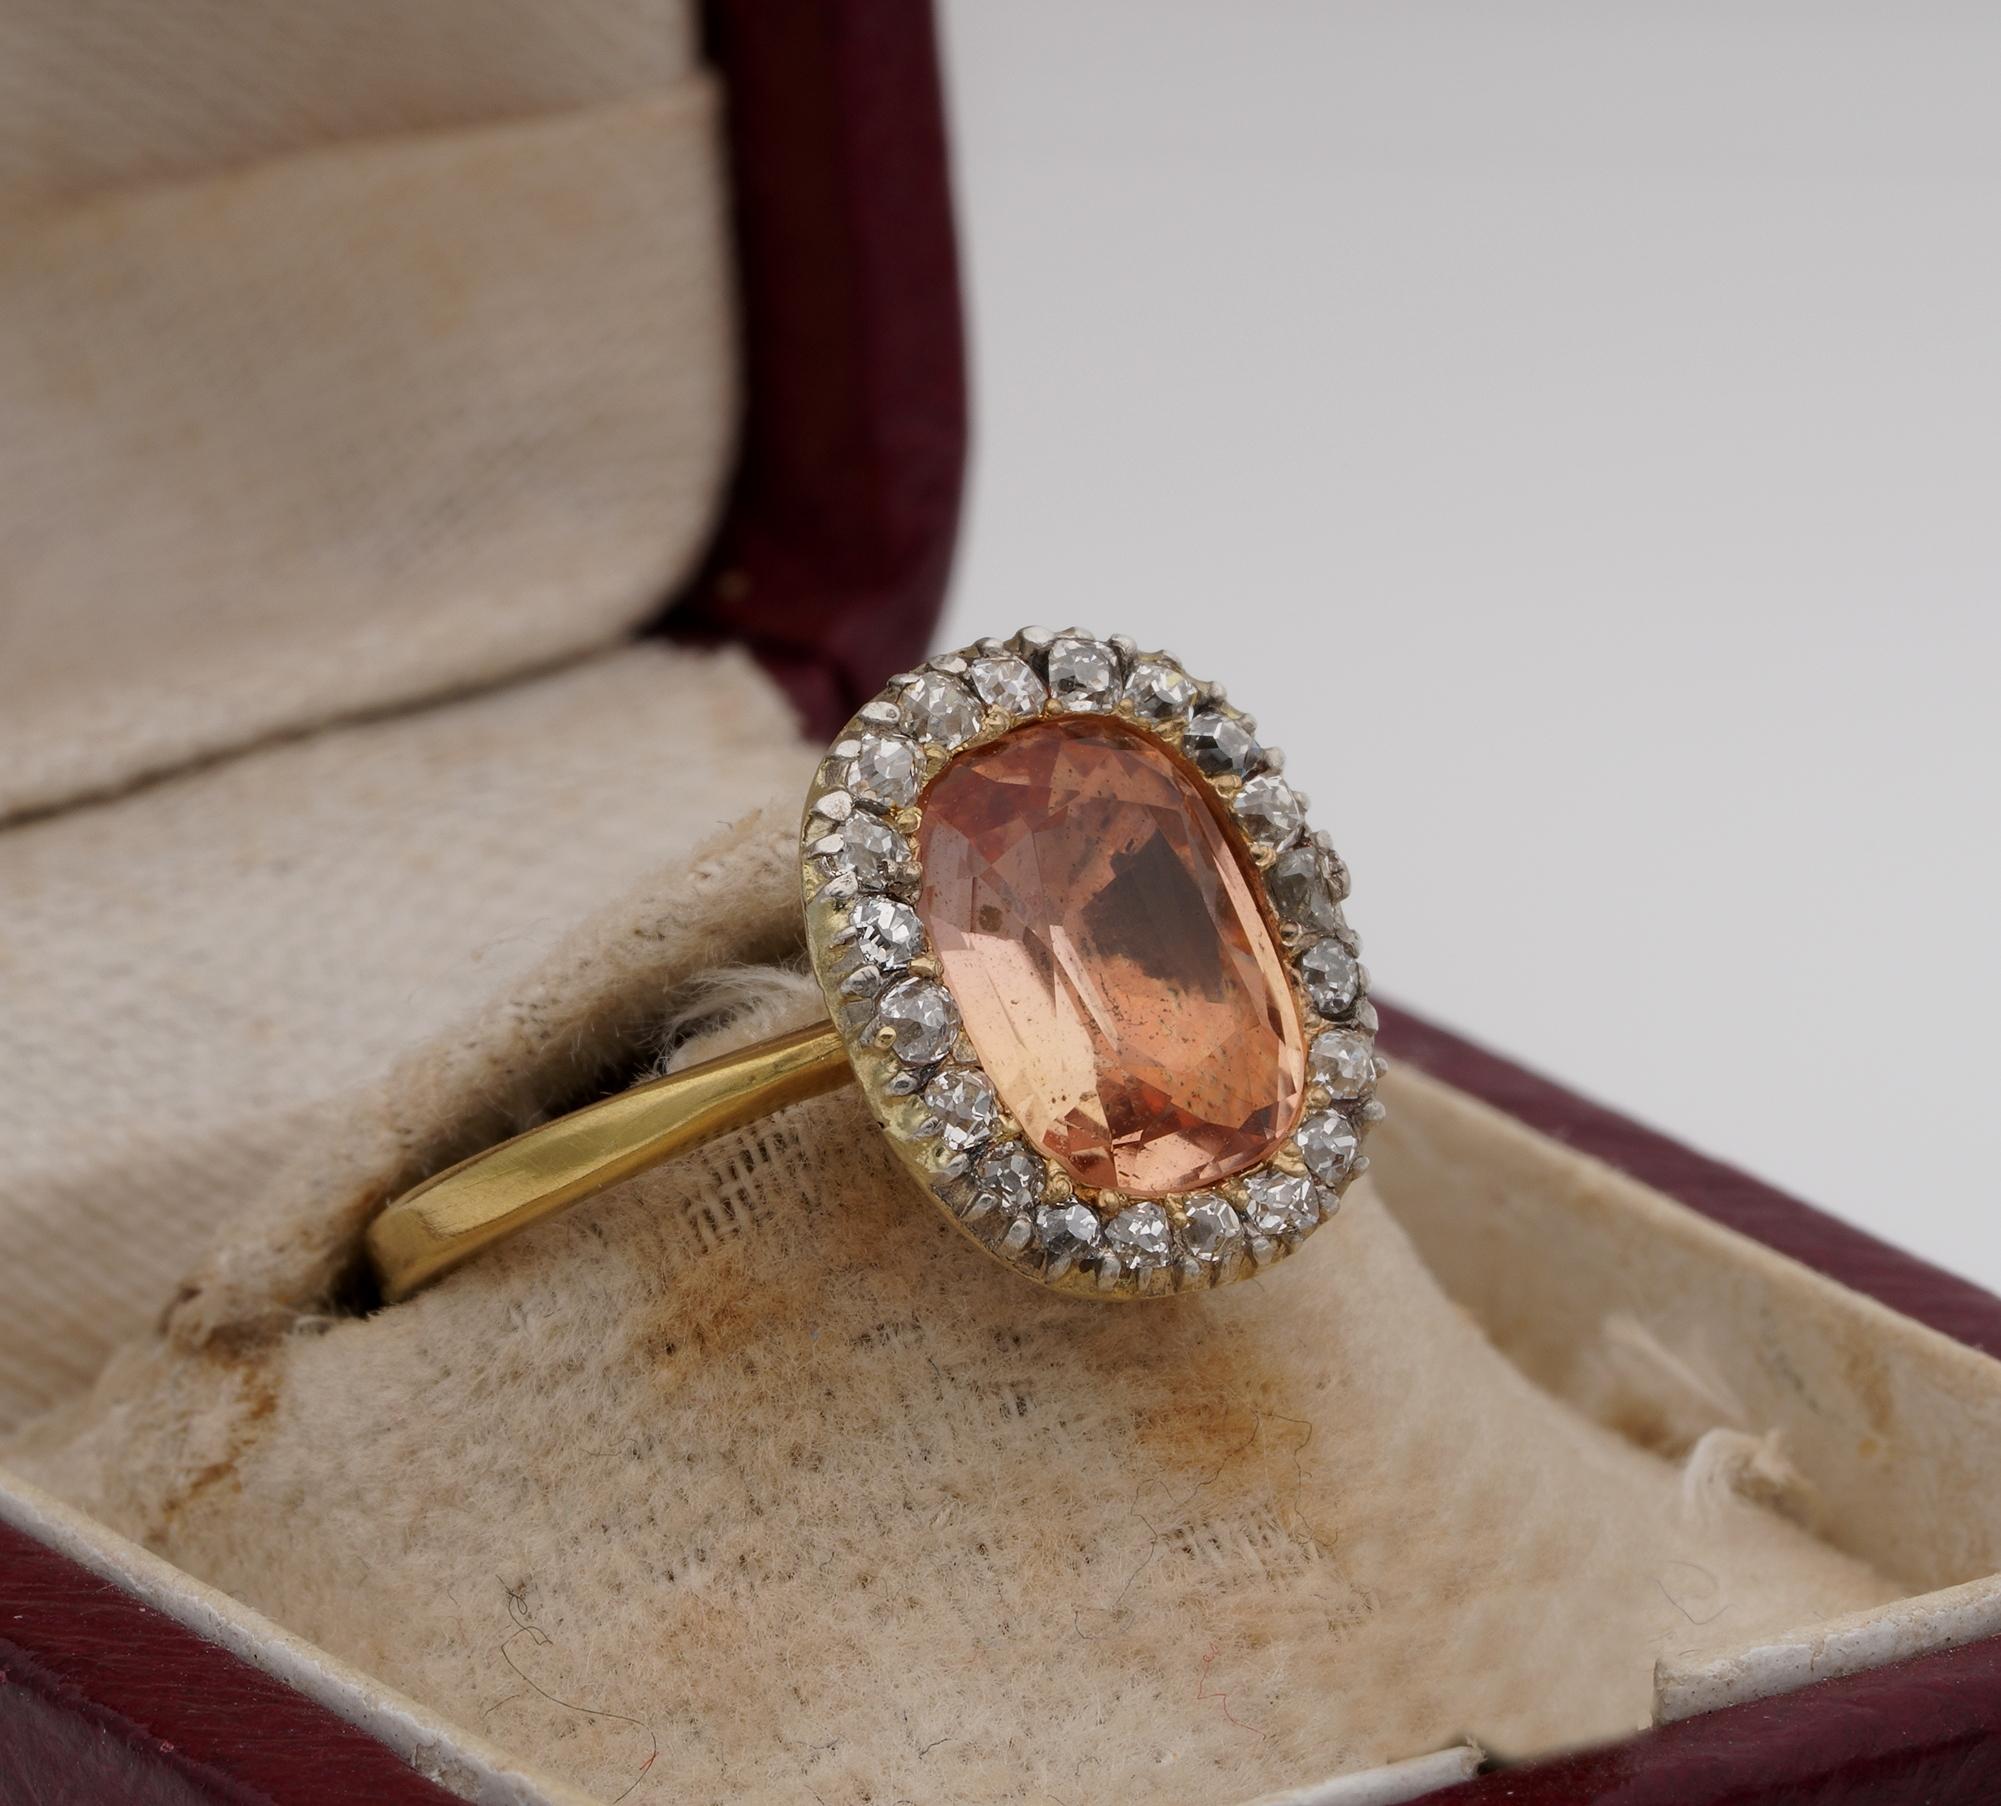 The Imperial Colour: Pink With Yellow

Imperial topaz is also known as 